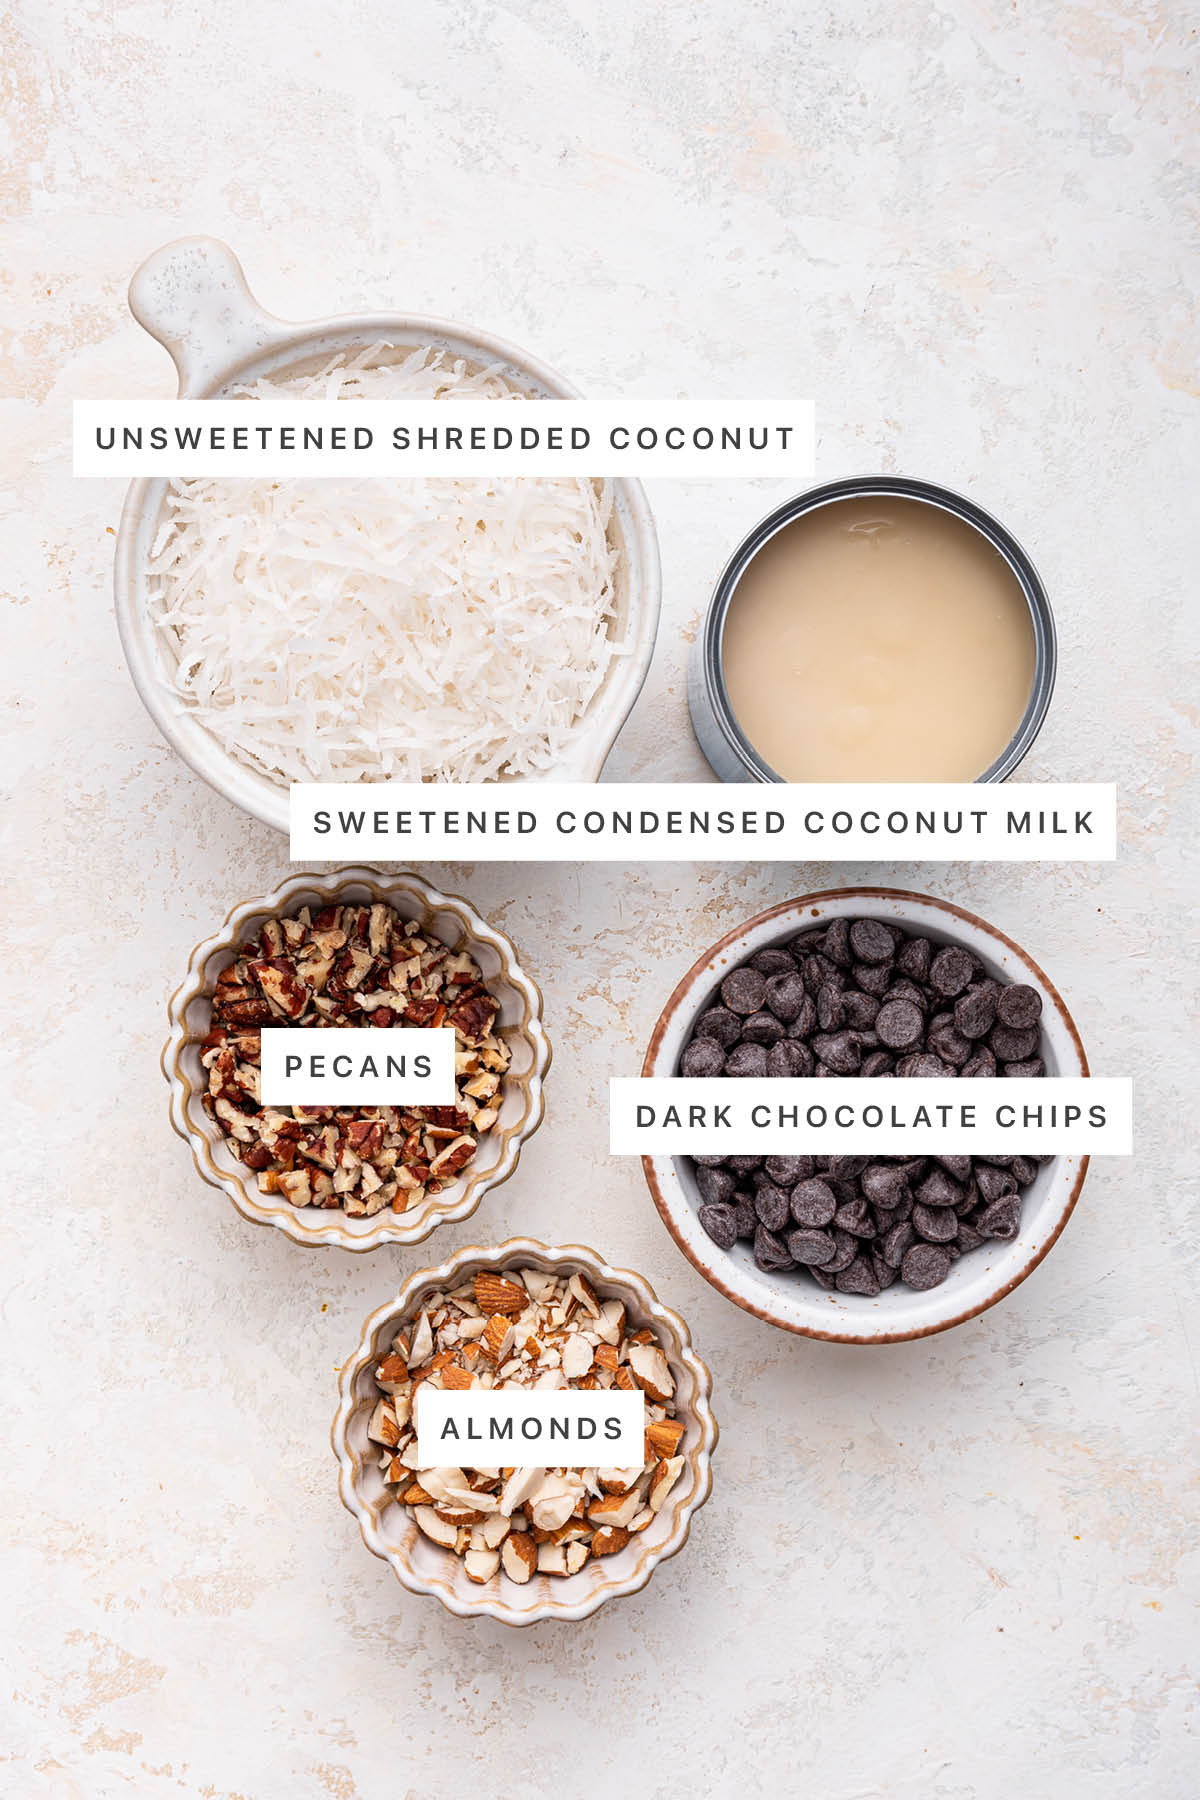 Ingredients measured out to make 5-Ingredient Chocolate Coconut Bars: unsweetened shredded coconut, sweetened condensed coconut milk, pecans, dark chocolate chips and almonds.